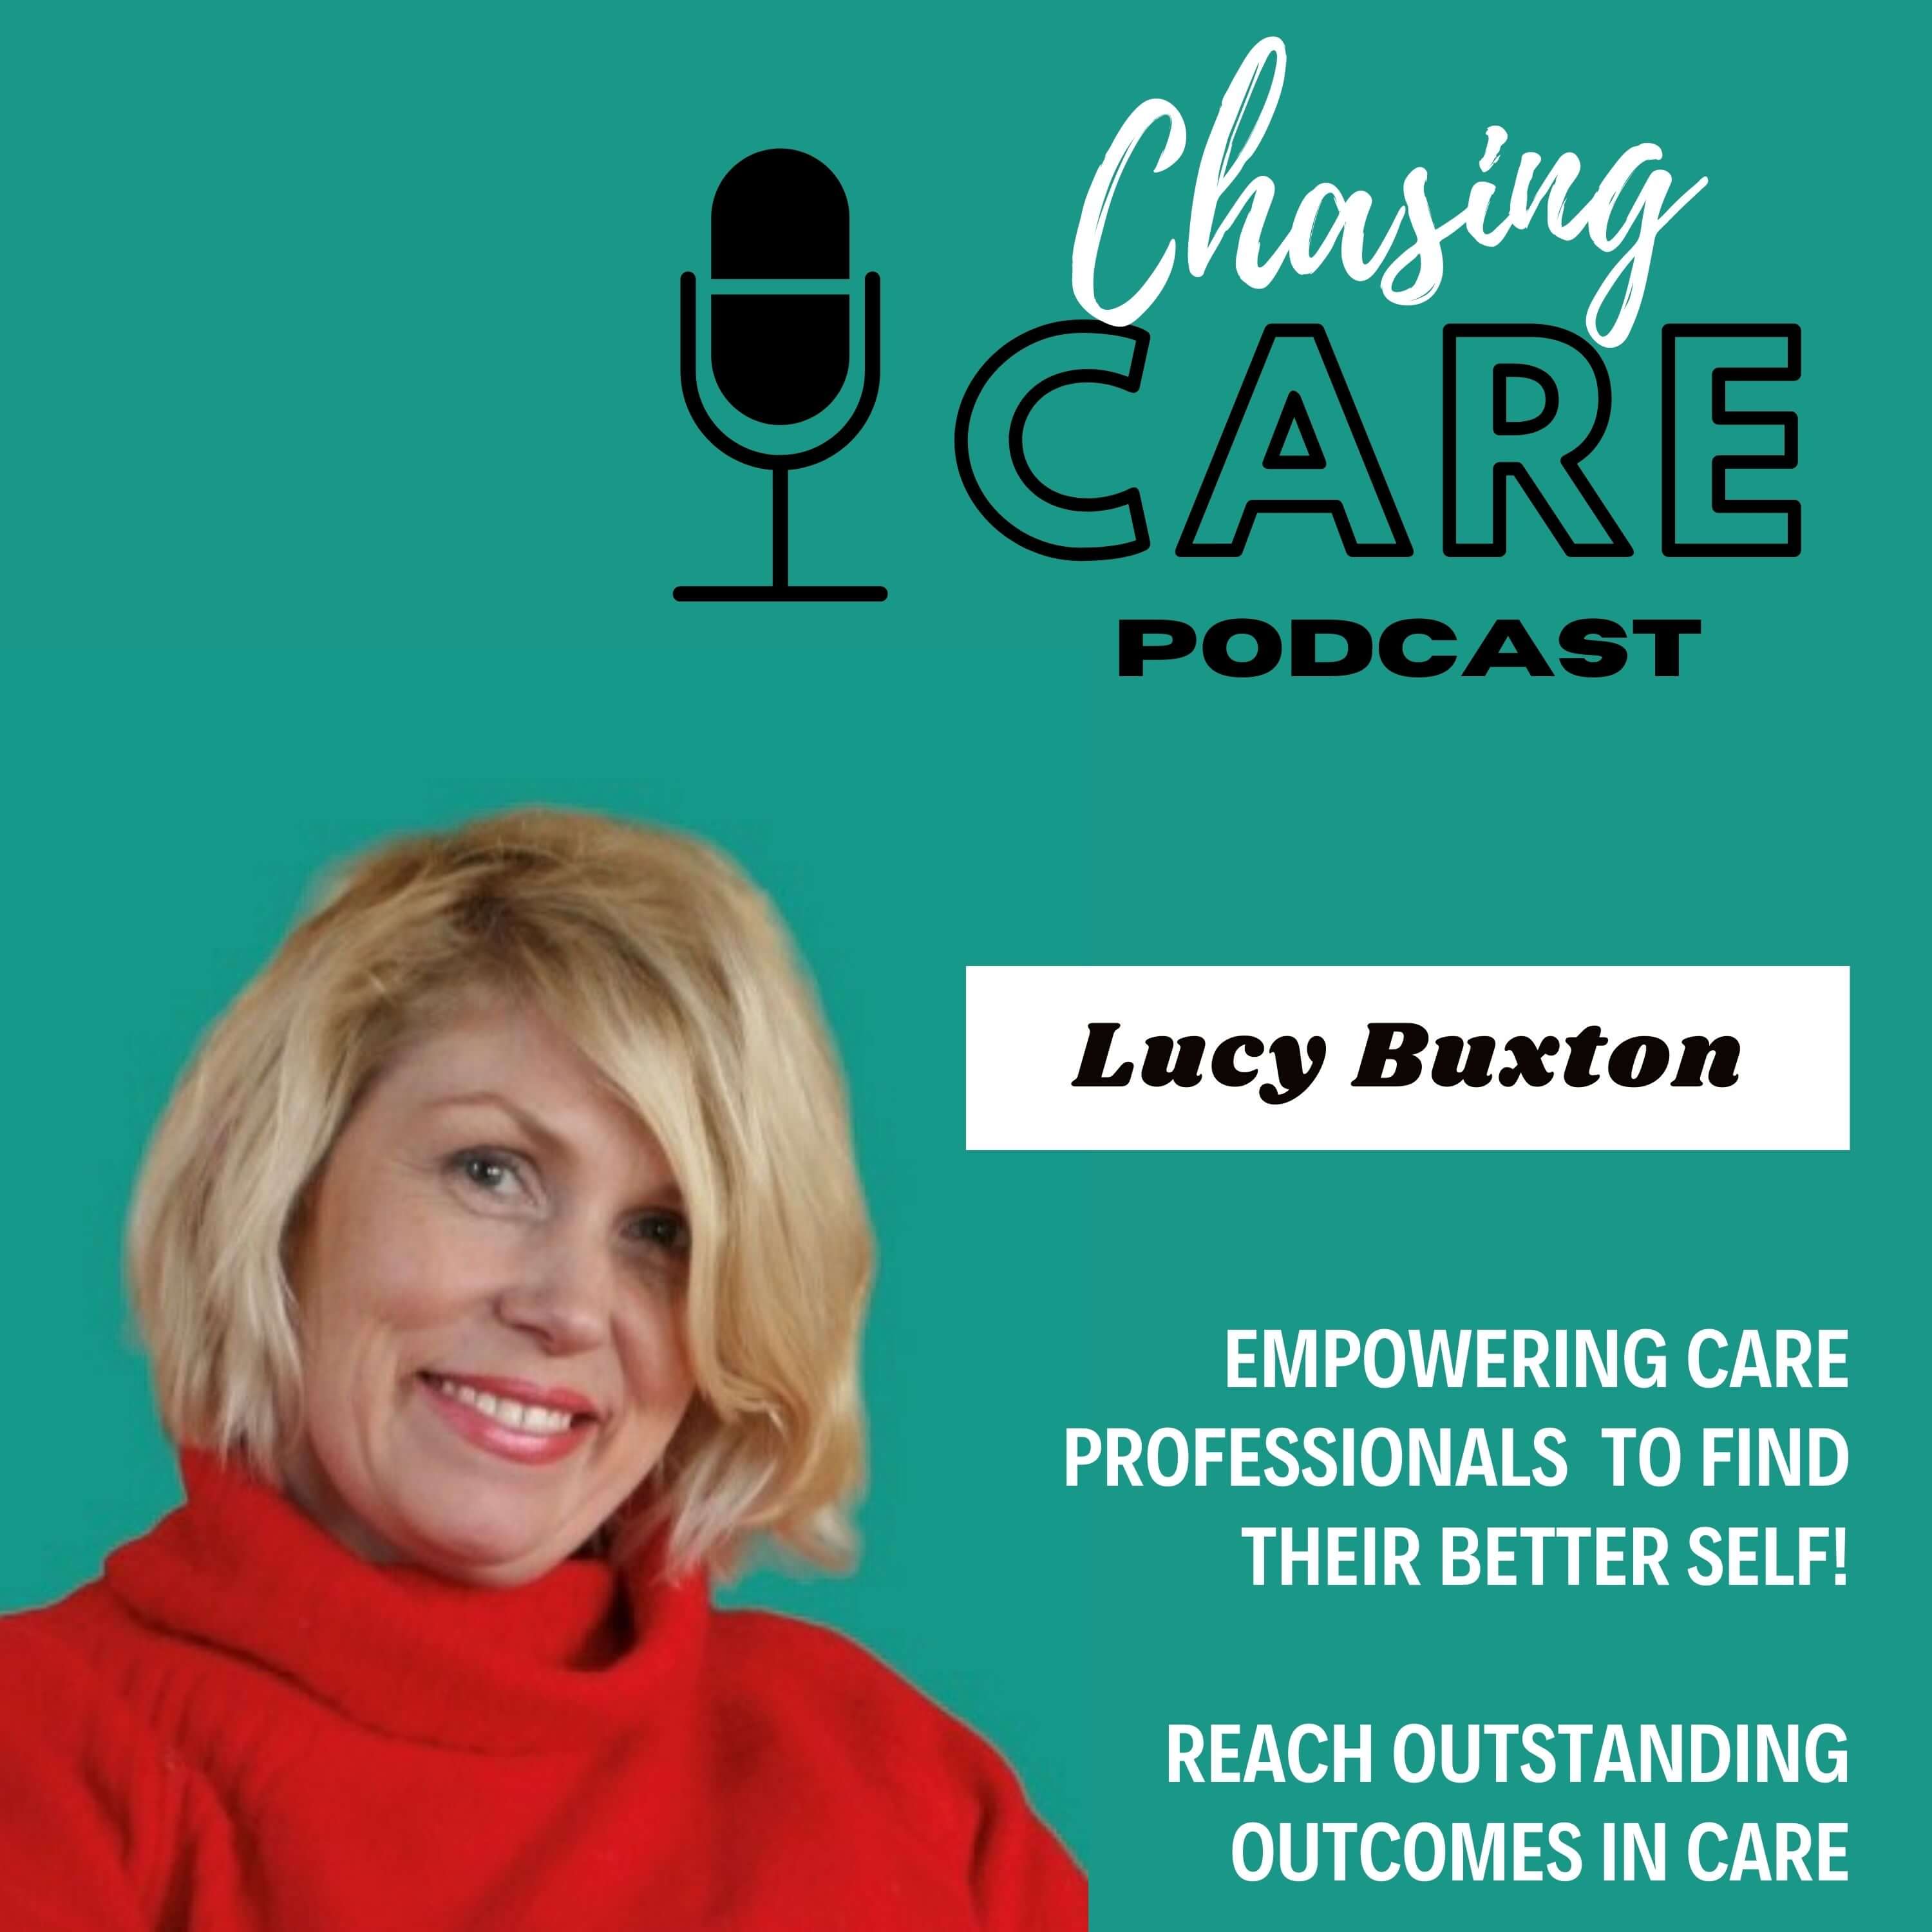 Chasing Care podcast with Lucy Buxton - Find your better self